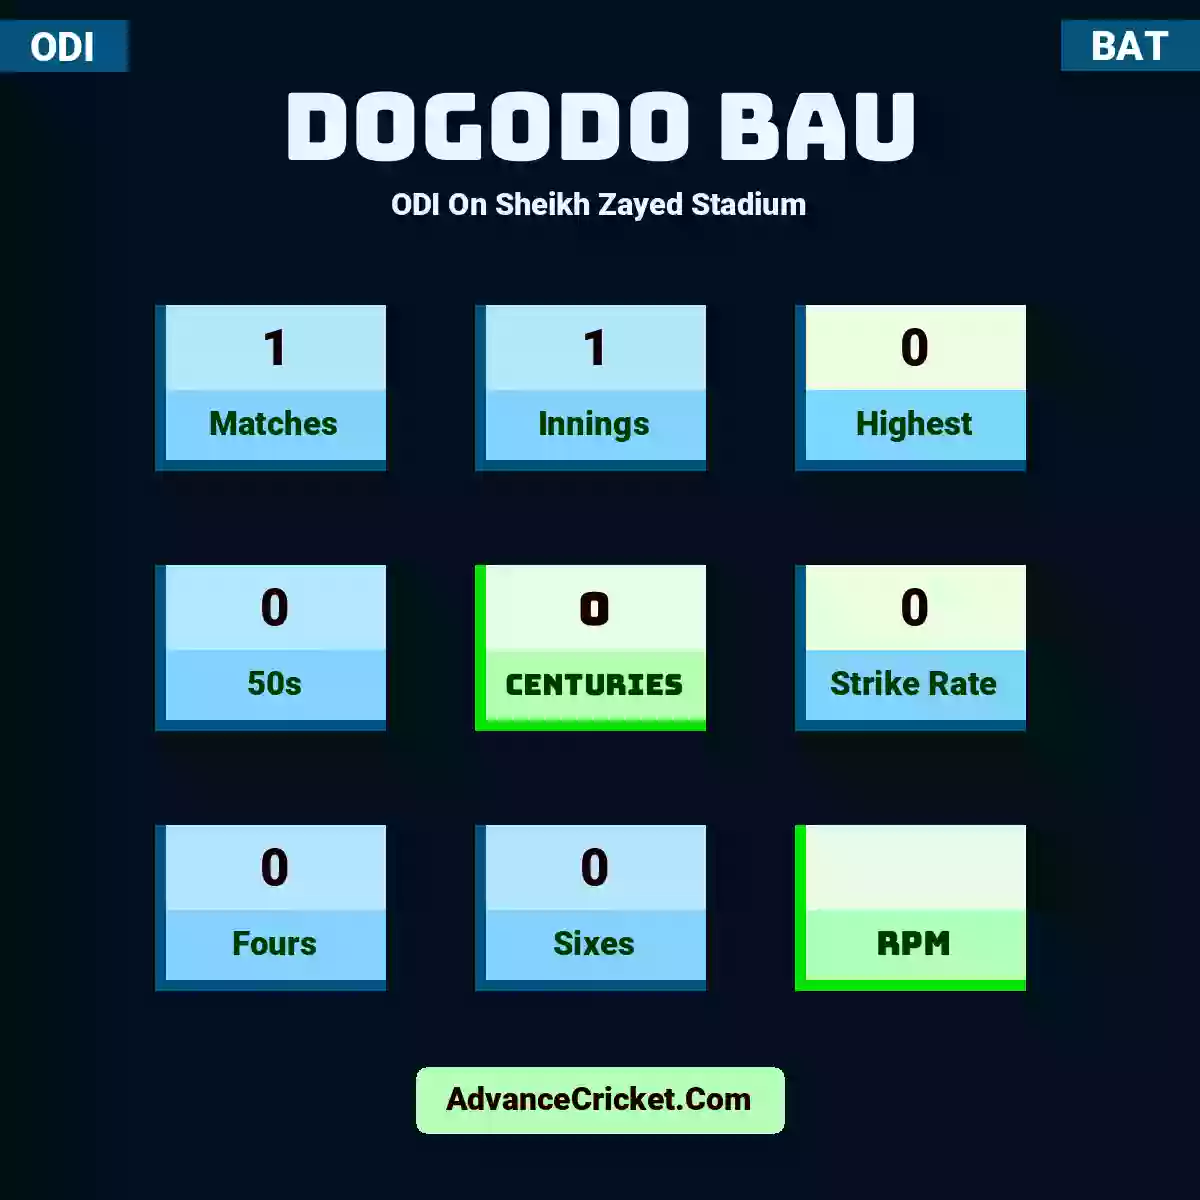 Dogodo Bau ODI  On Sheikh Zayed Stadium, Dogodo Bau played 1 matches, scored 0 runs as highest, 0 half-centuries, and 0 centuries, with a strike rate of 0. D.Bau hit 0 fours and 0 sixes.